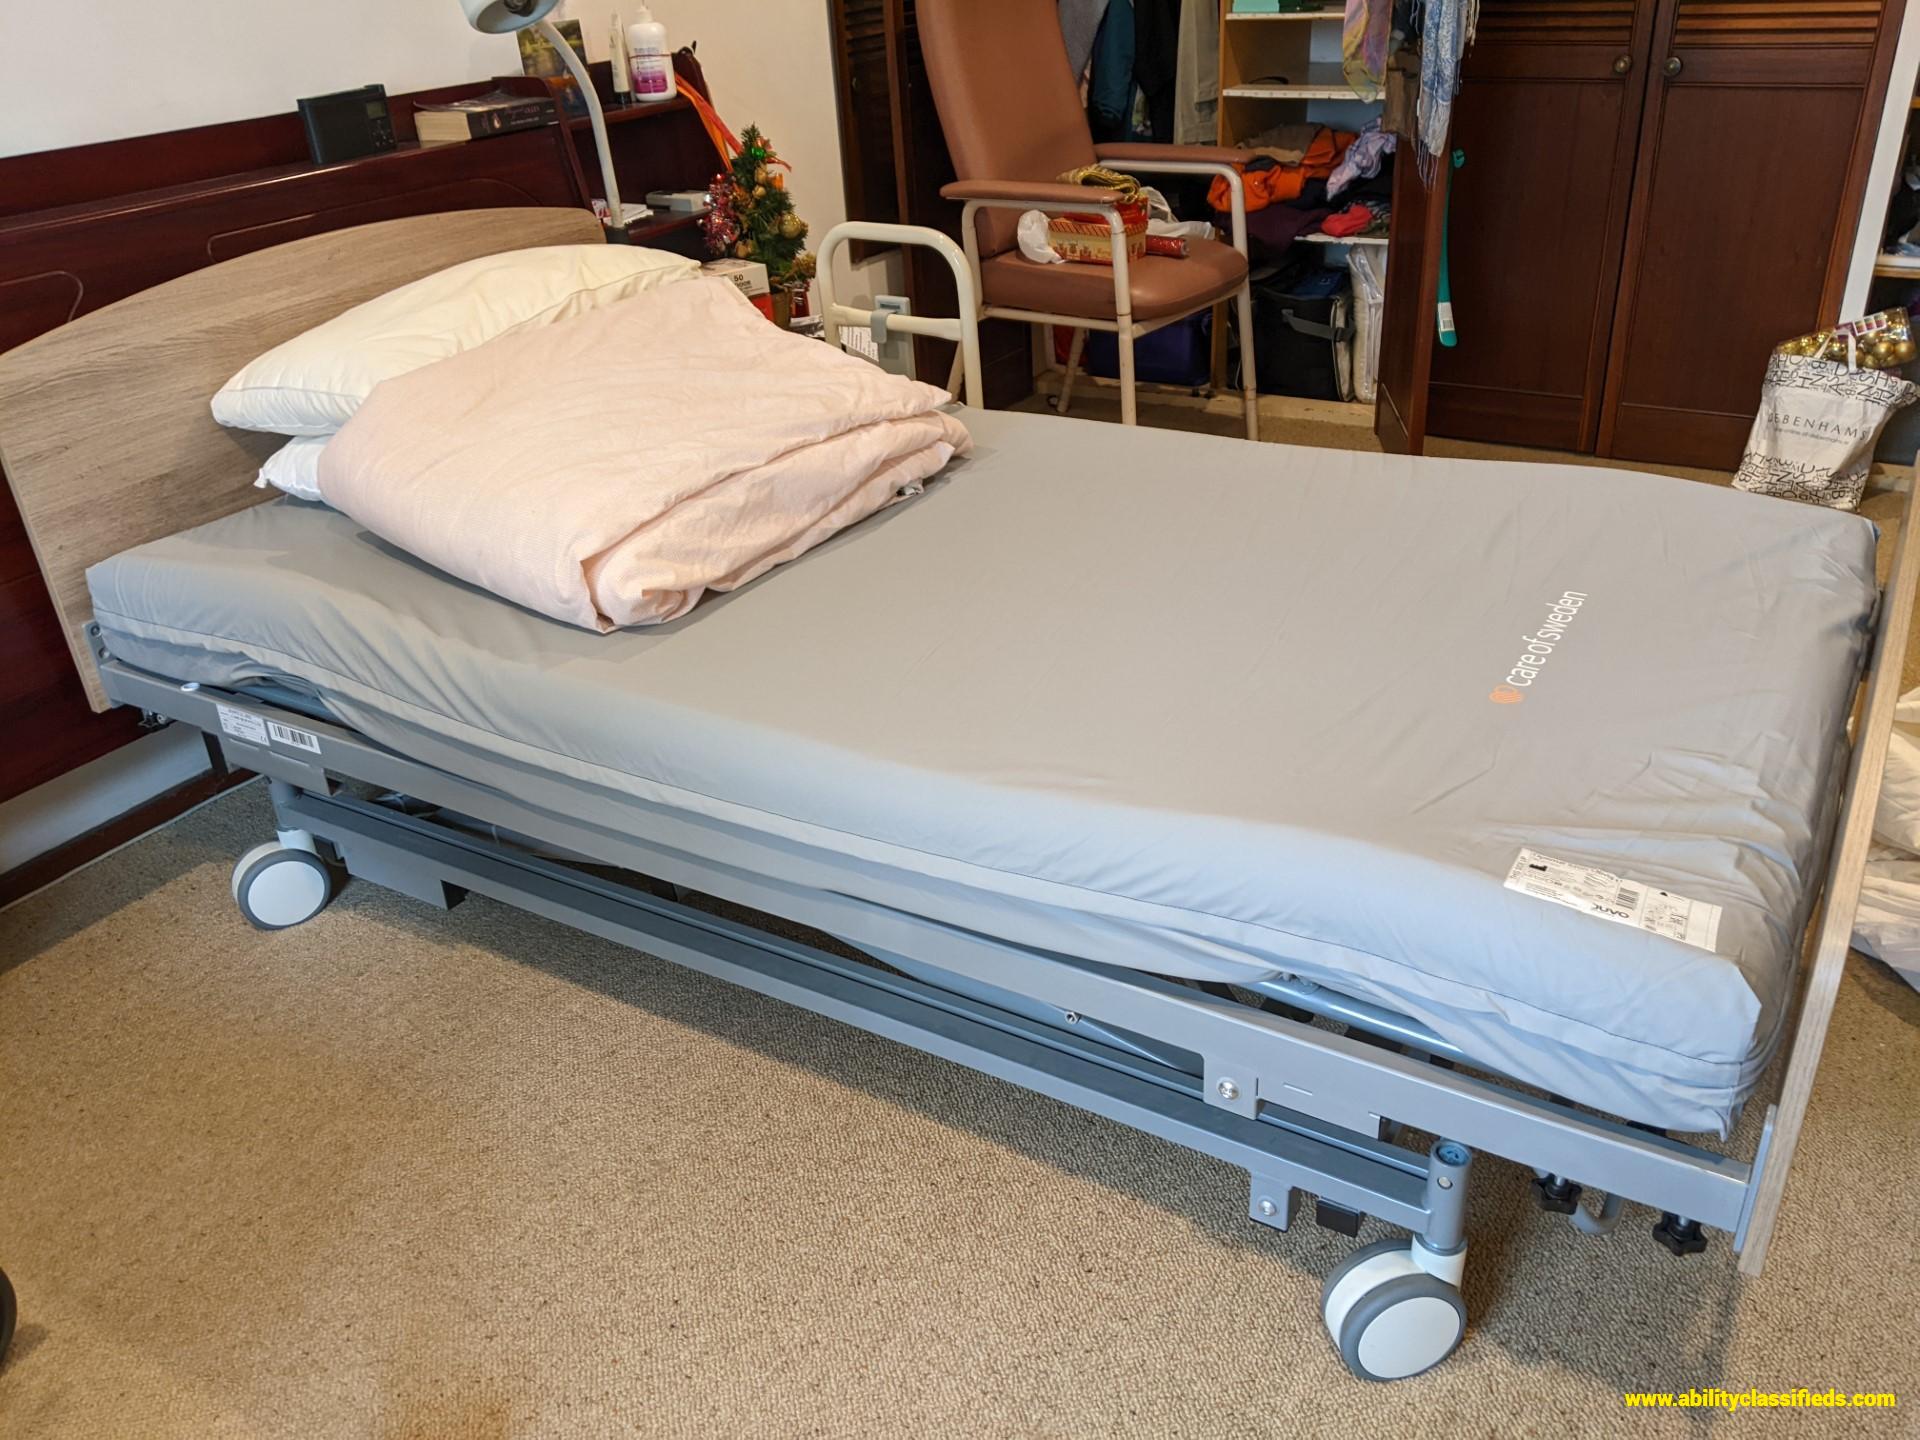 Alrick electric bed, mattress and safety rail